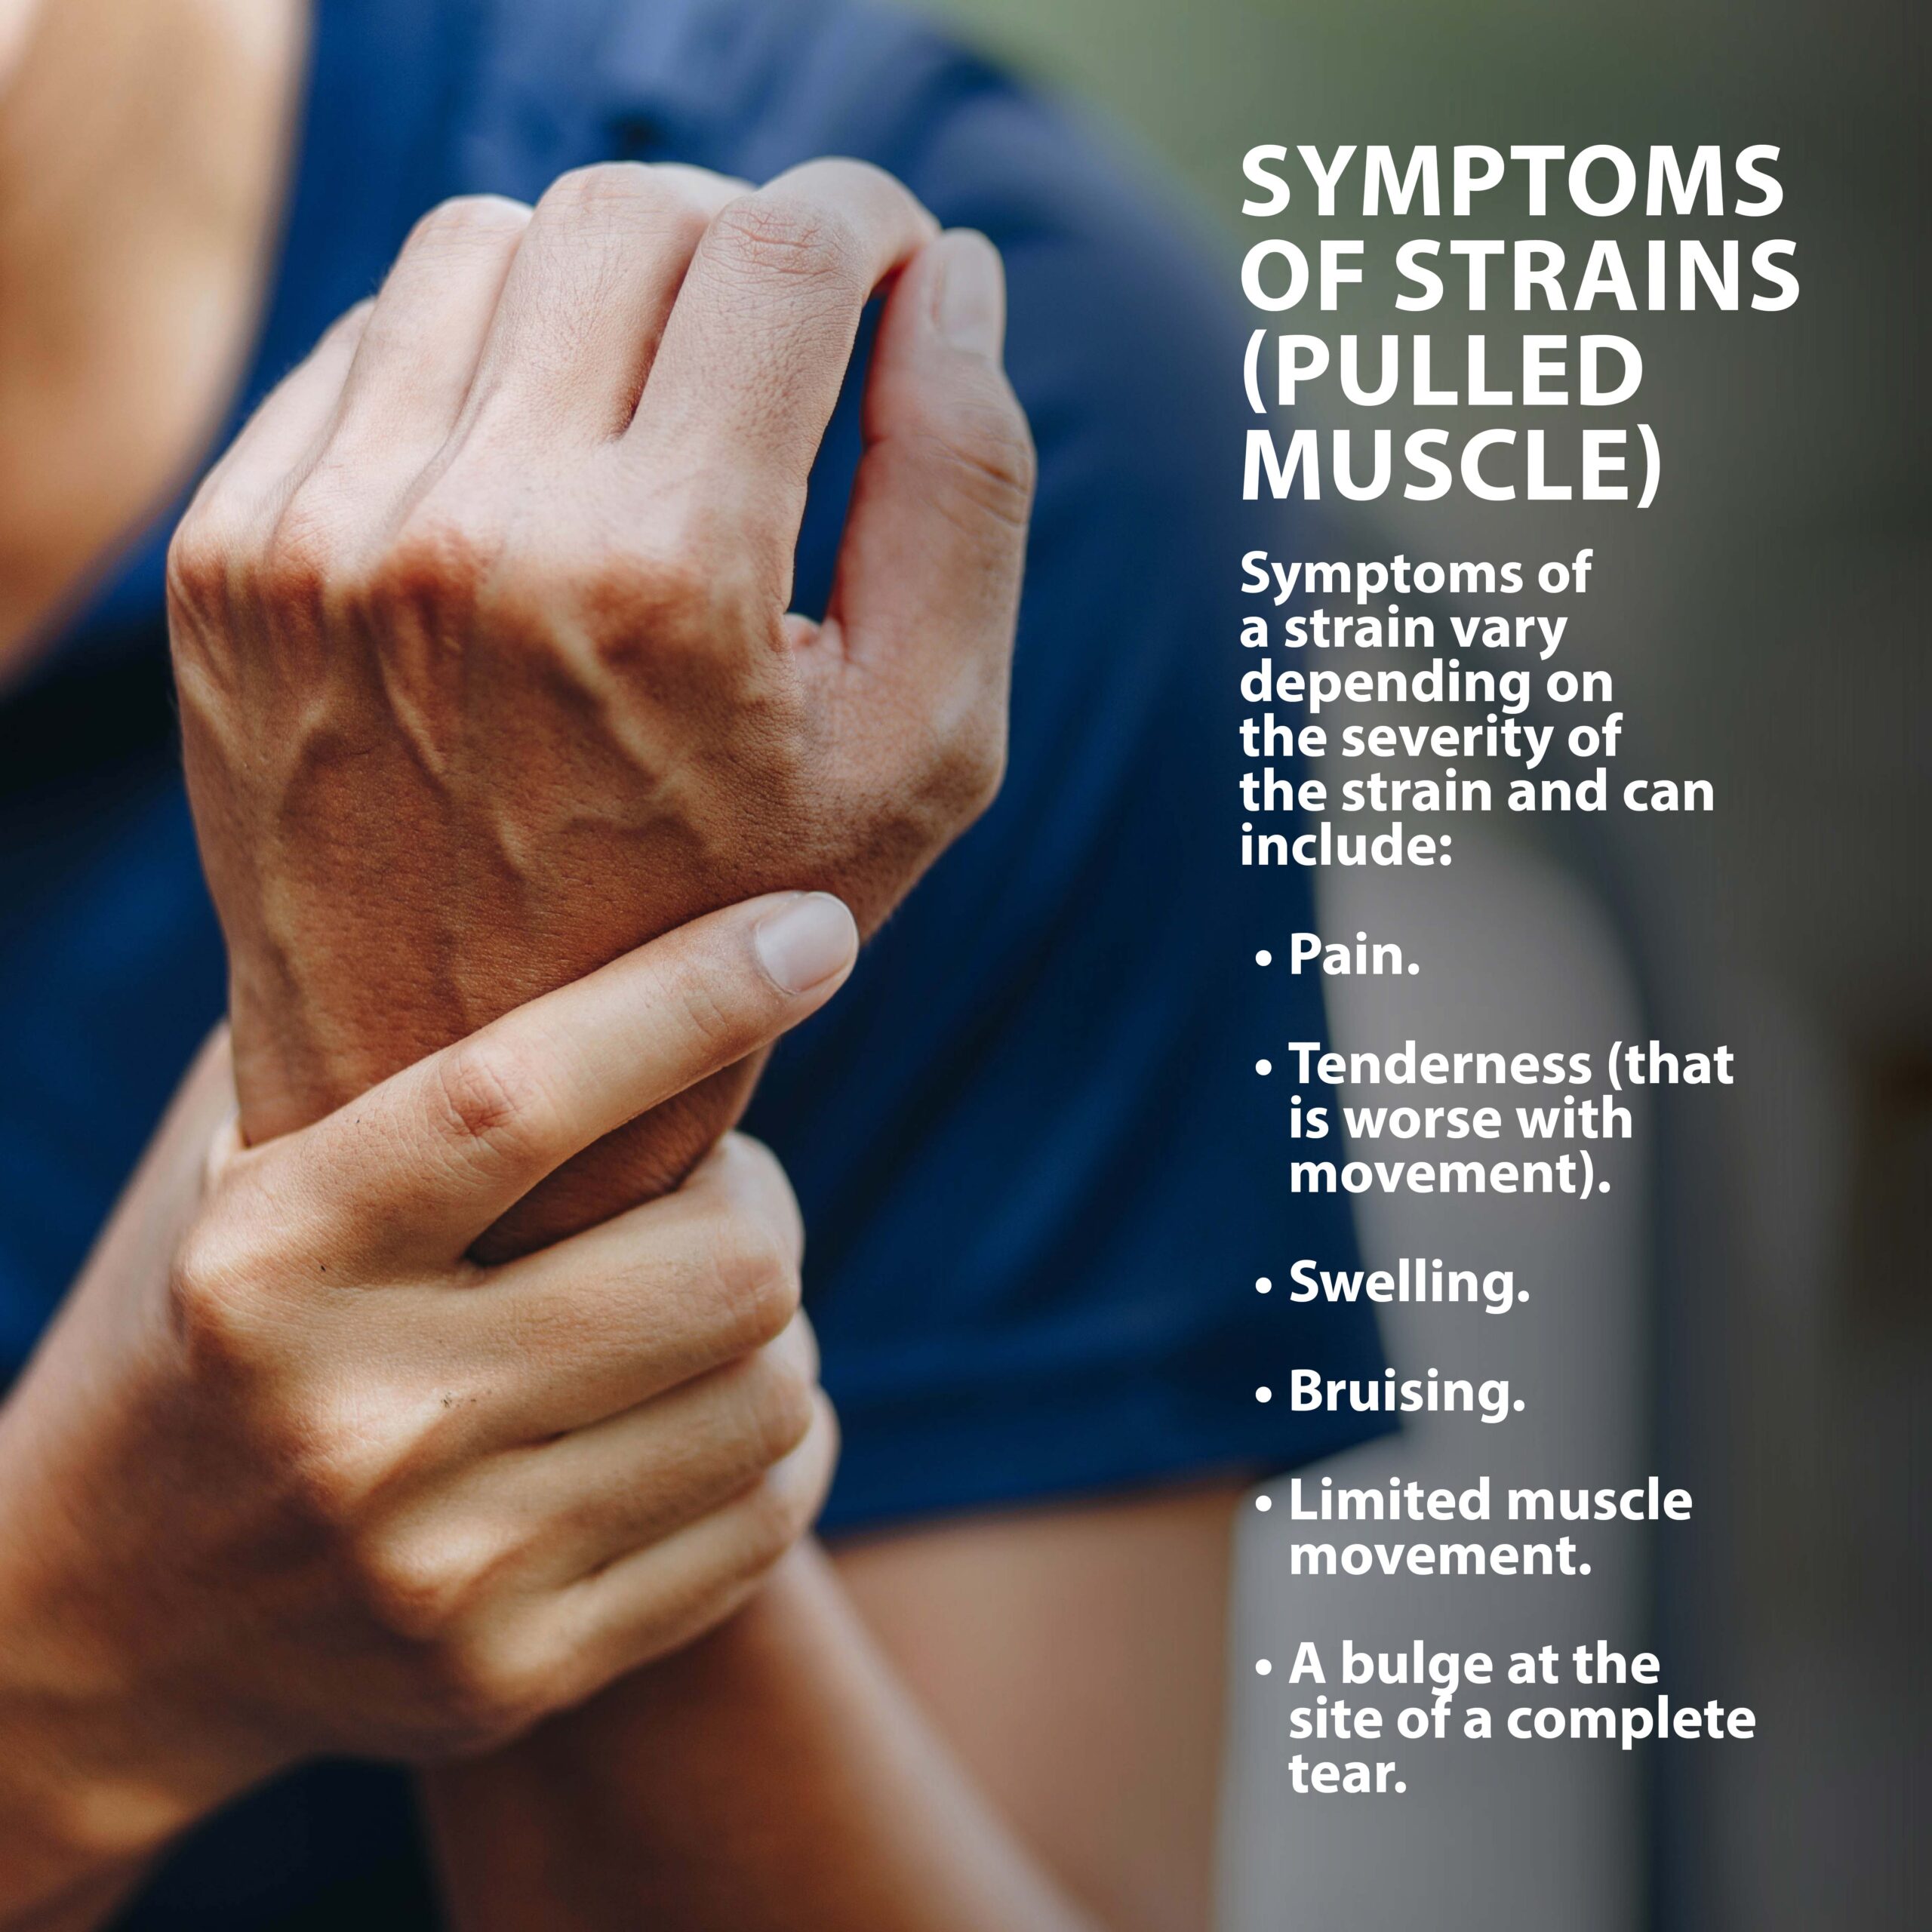 Sprained finger: Symptoms, treatment, and recovery